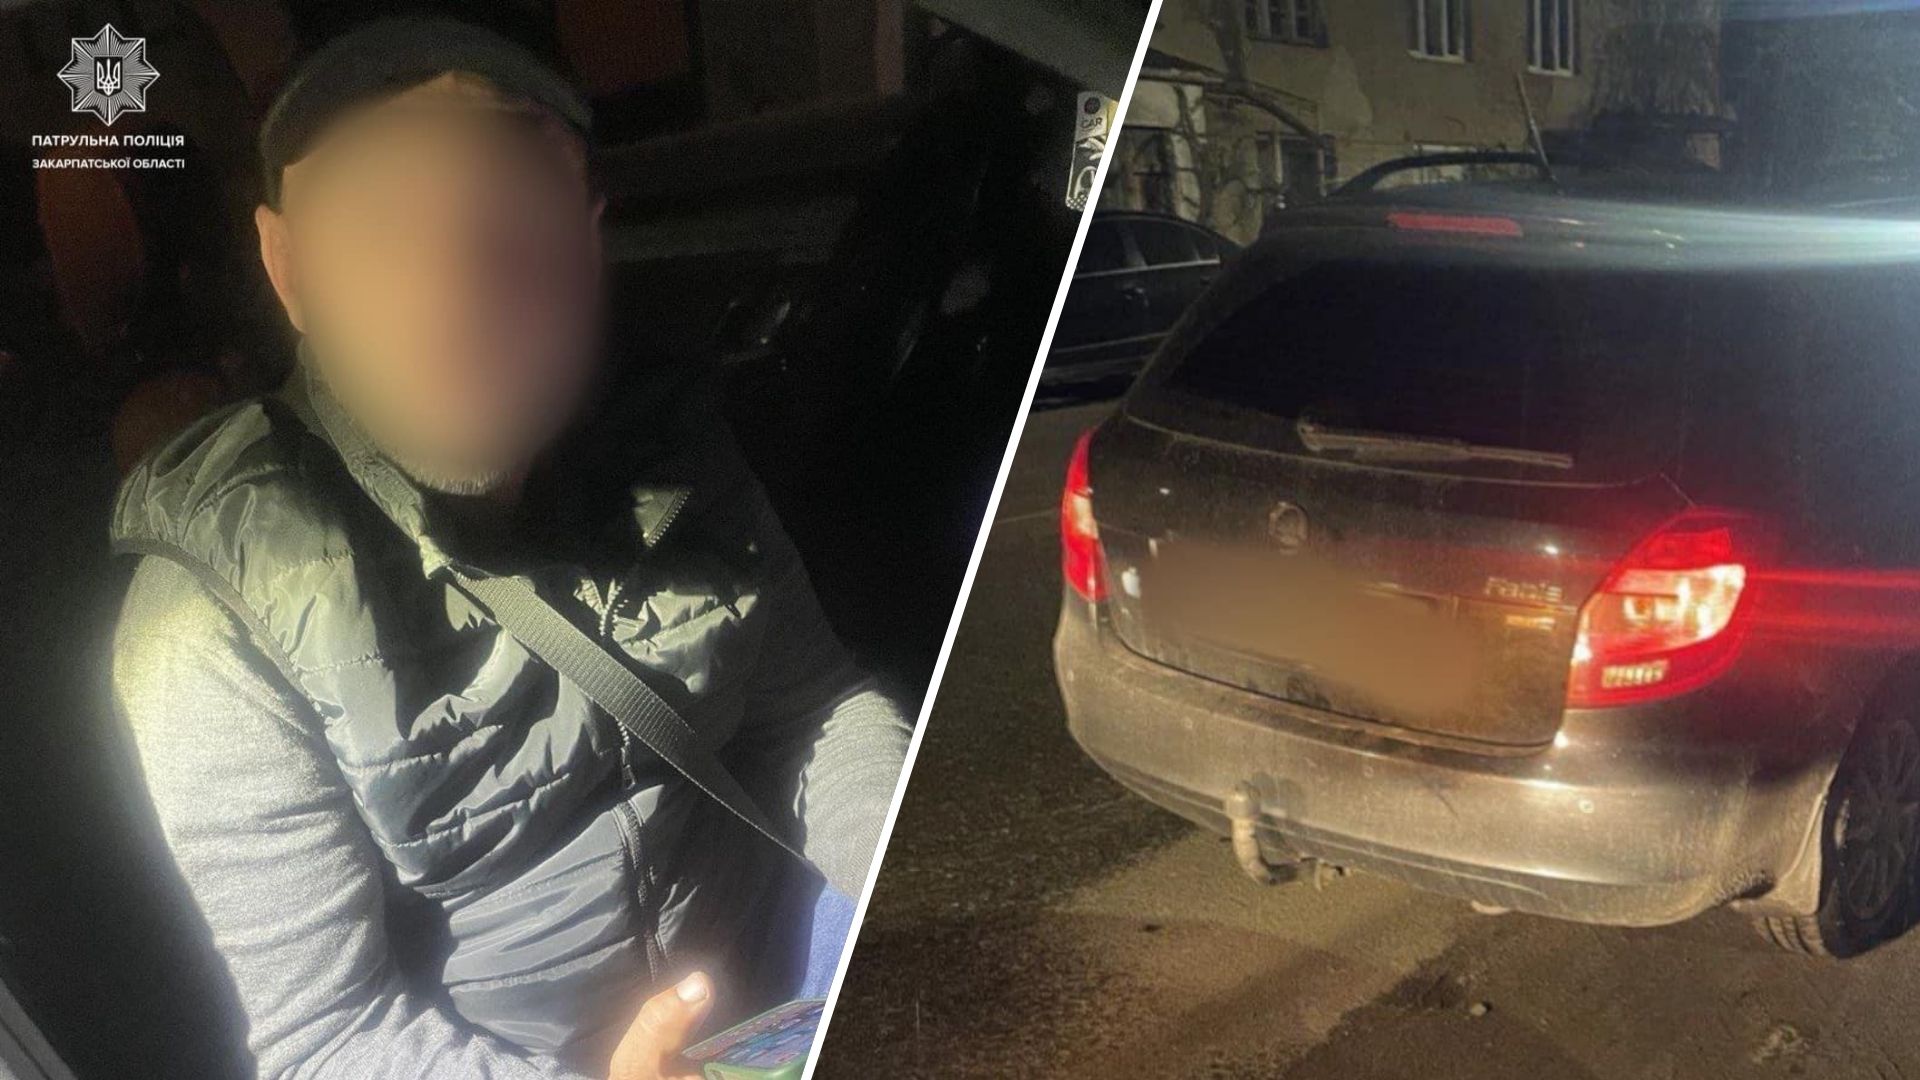 In Mukachevo, patrol officers stopped a driver who was driving a Skoda car and violated traffic rules.